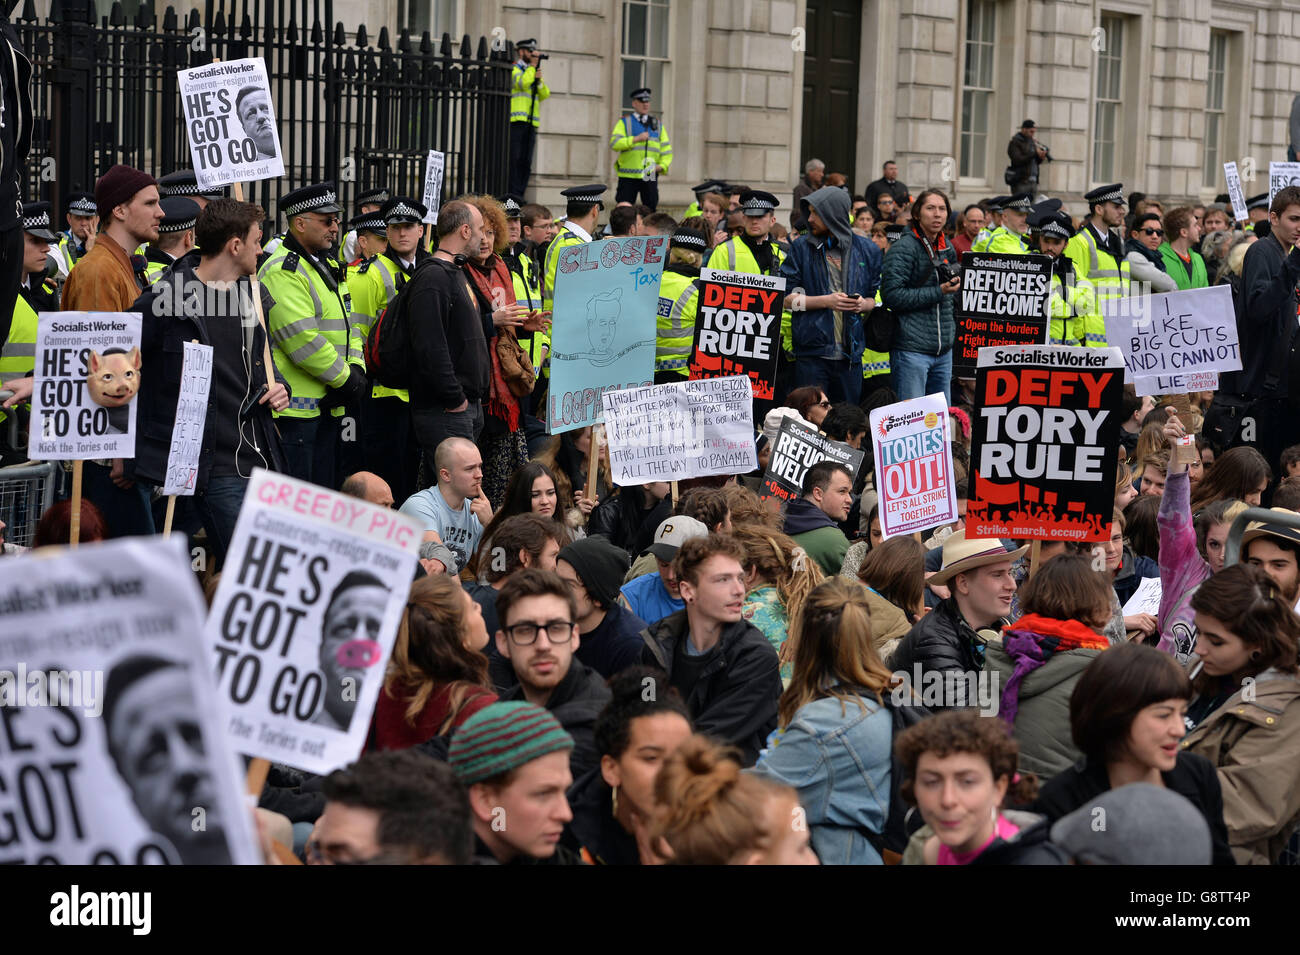 EDITORS NOTE LANGUAGE ON BANNER Protesters gather outside the gates of Downing Street in London to call for the resignation of Prime Minister David Cameron in the wake of the Mossack Fonseca data leak. Stock Photo